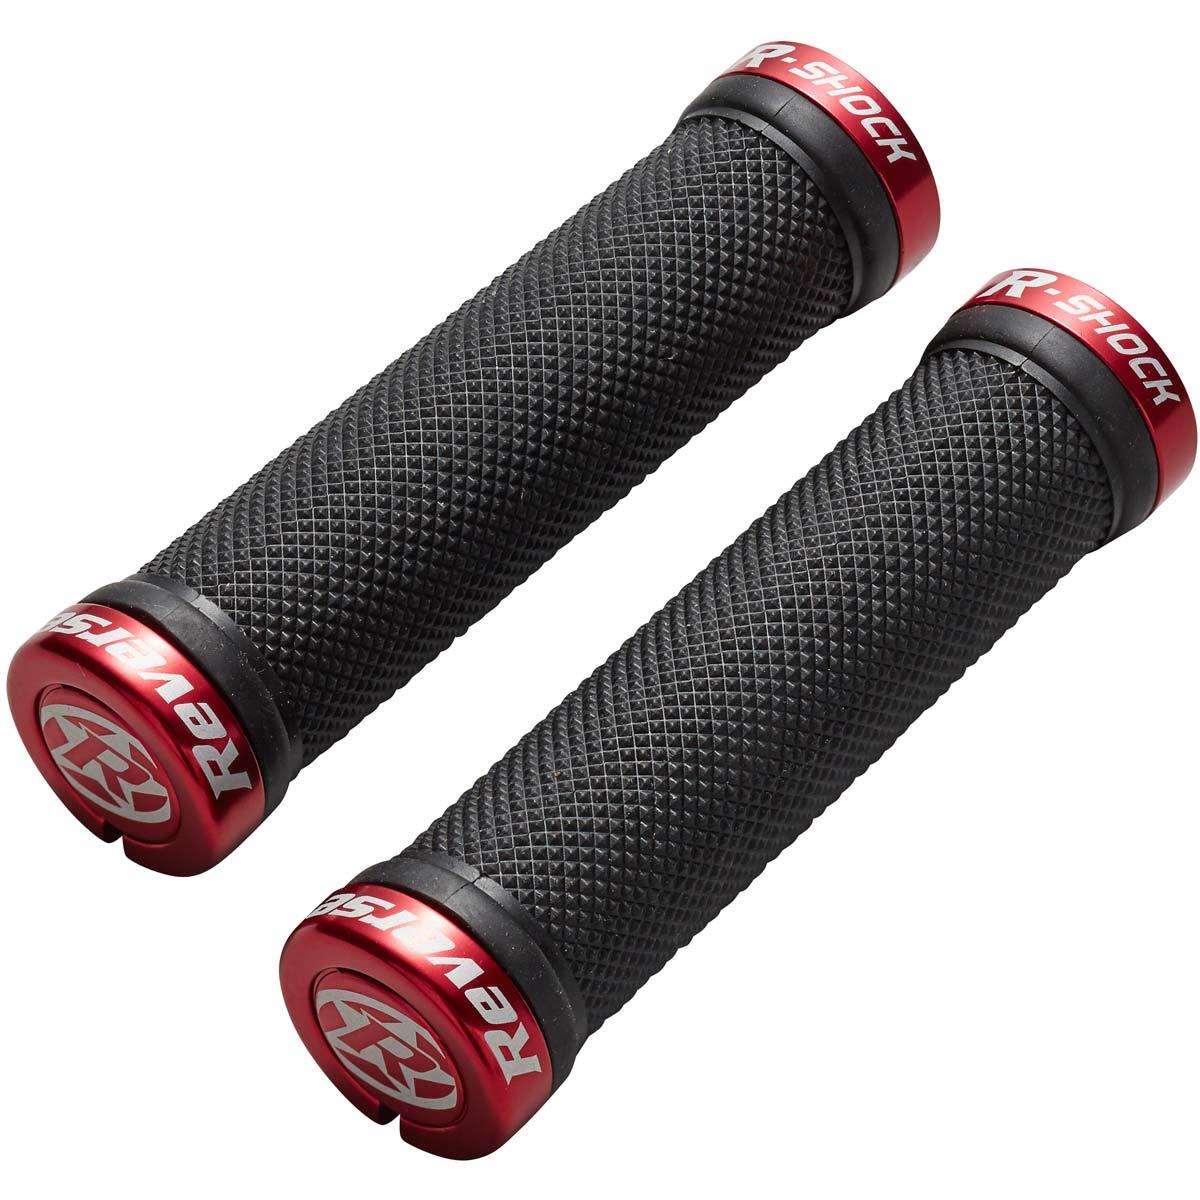 Reverse Components MTB Grips R-Shock Lock-On System, 31 x 130 mm, Black/Red